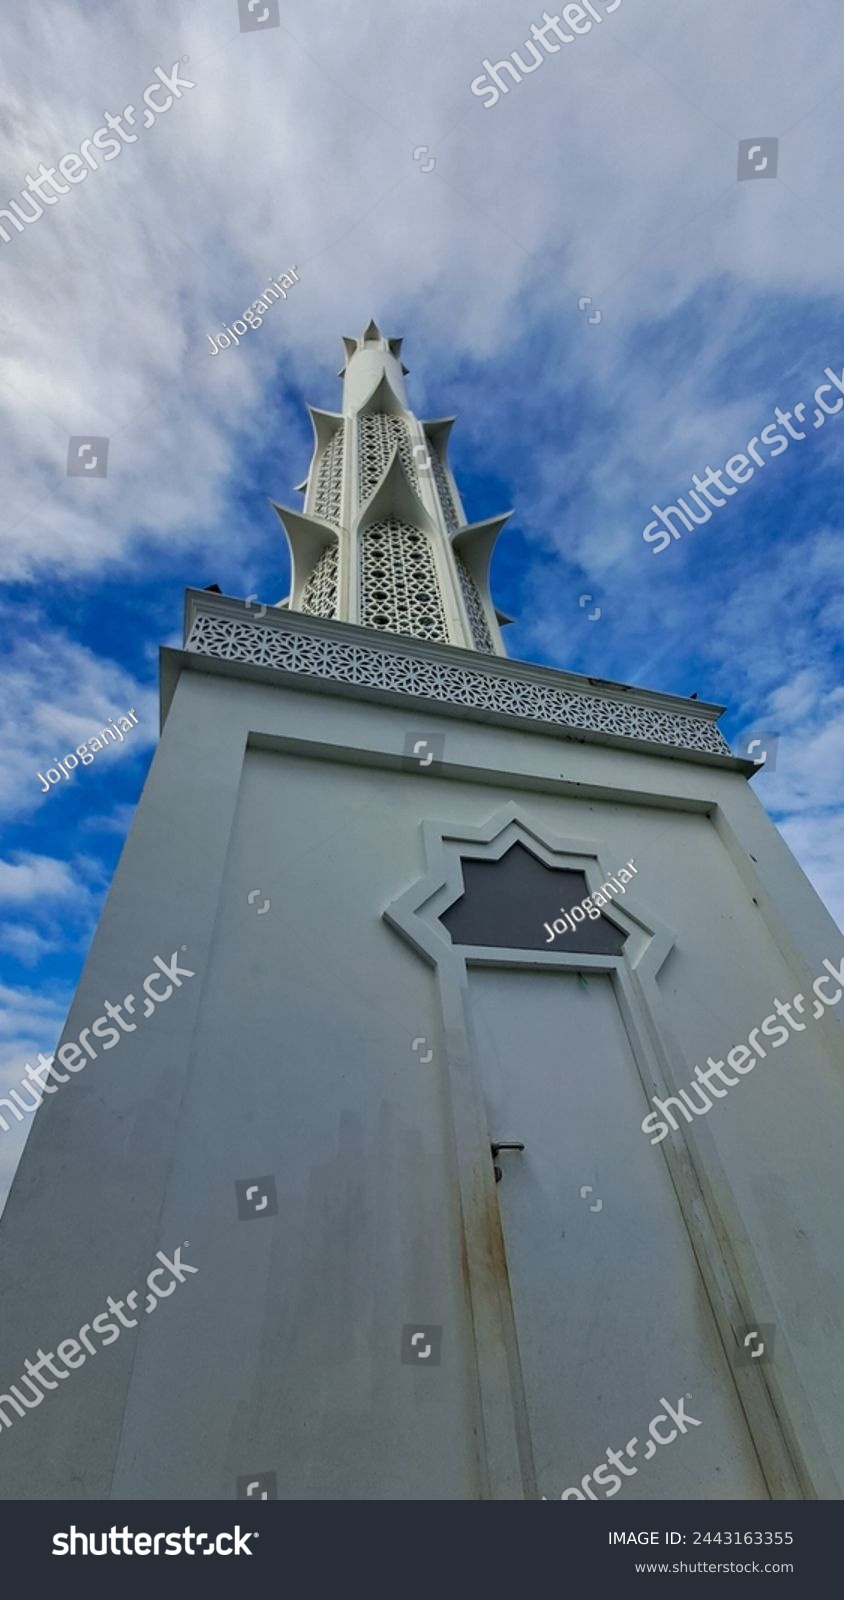 the mosque's minaret towers high into the sky #2443163355